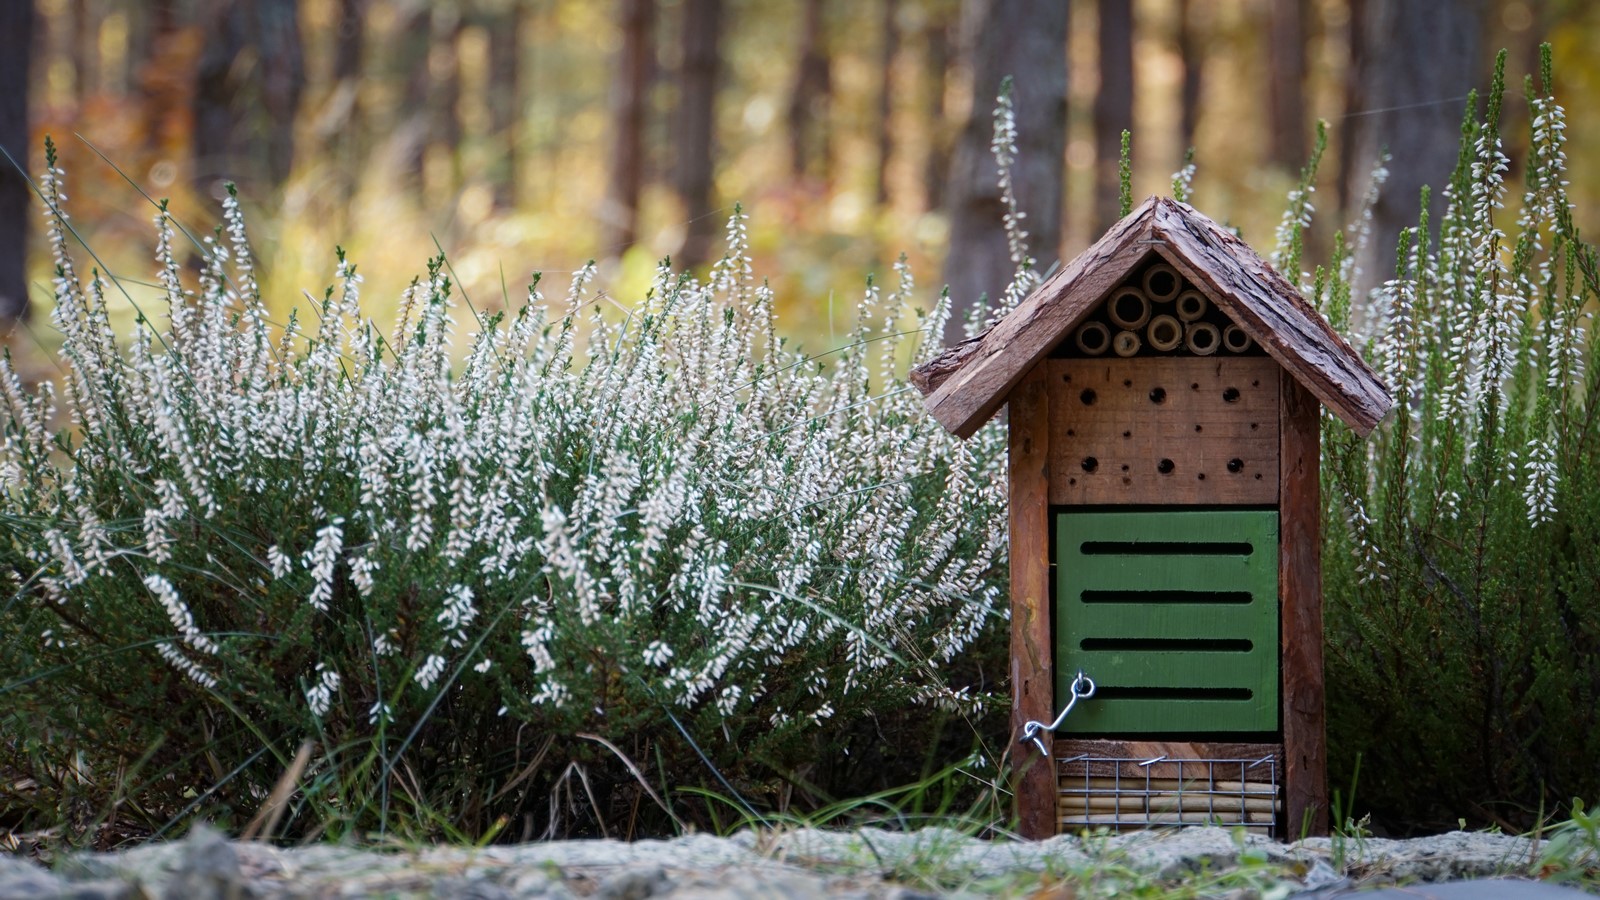 Rustic insect house